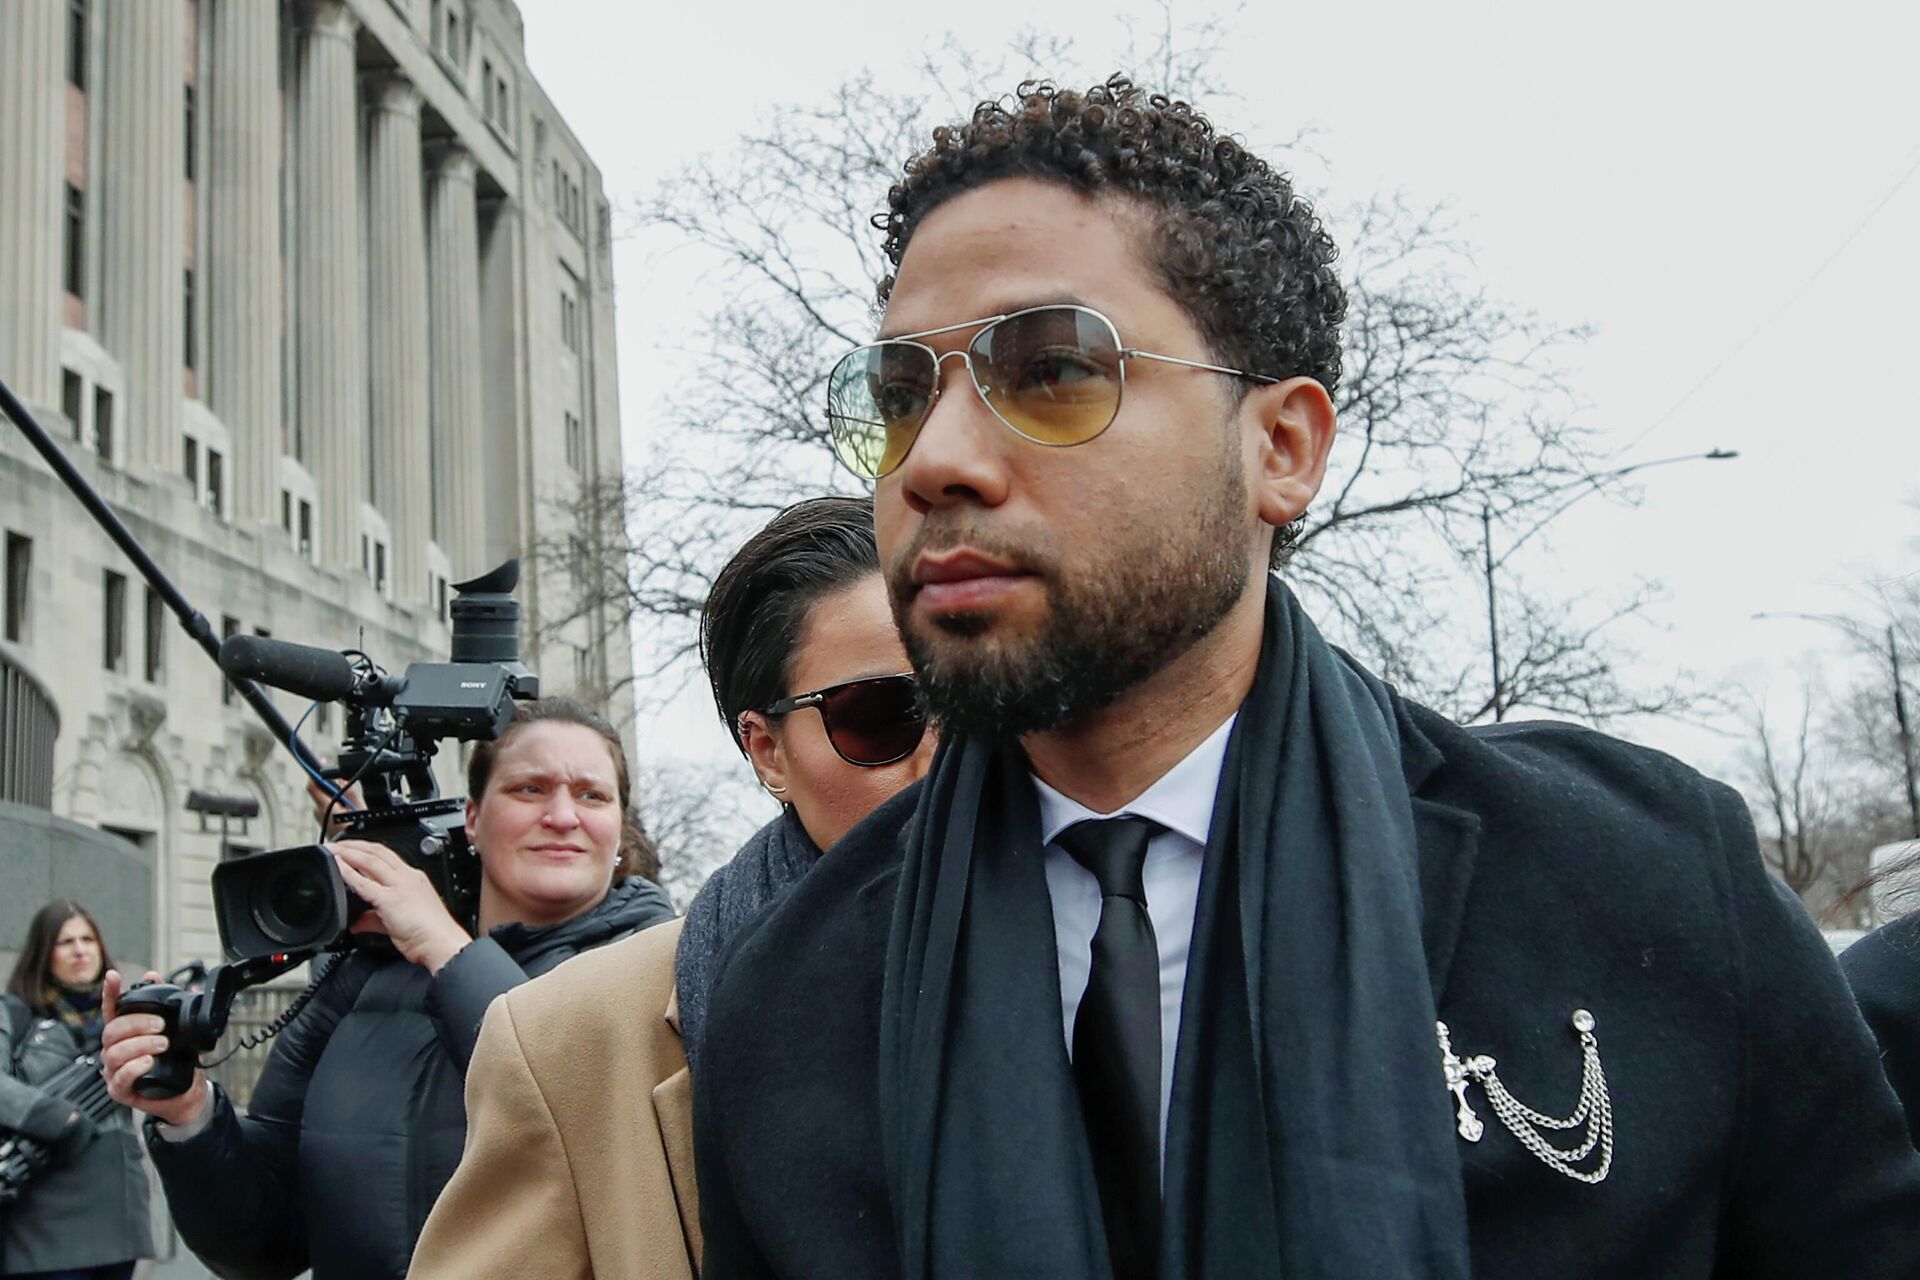 FILE PHOTO: Former Empire actor Jussie Smollett arrives at court for his arraignment on renewed felony charges in Chicago, Illinois, U.S. February 24, 2020 - Sputnik International, 1920, 11.12.2021